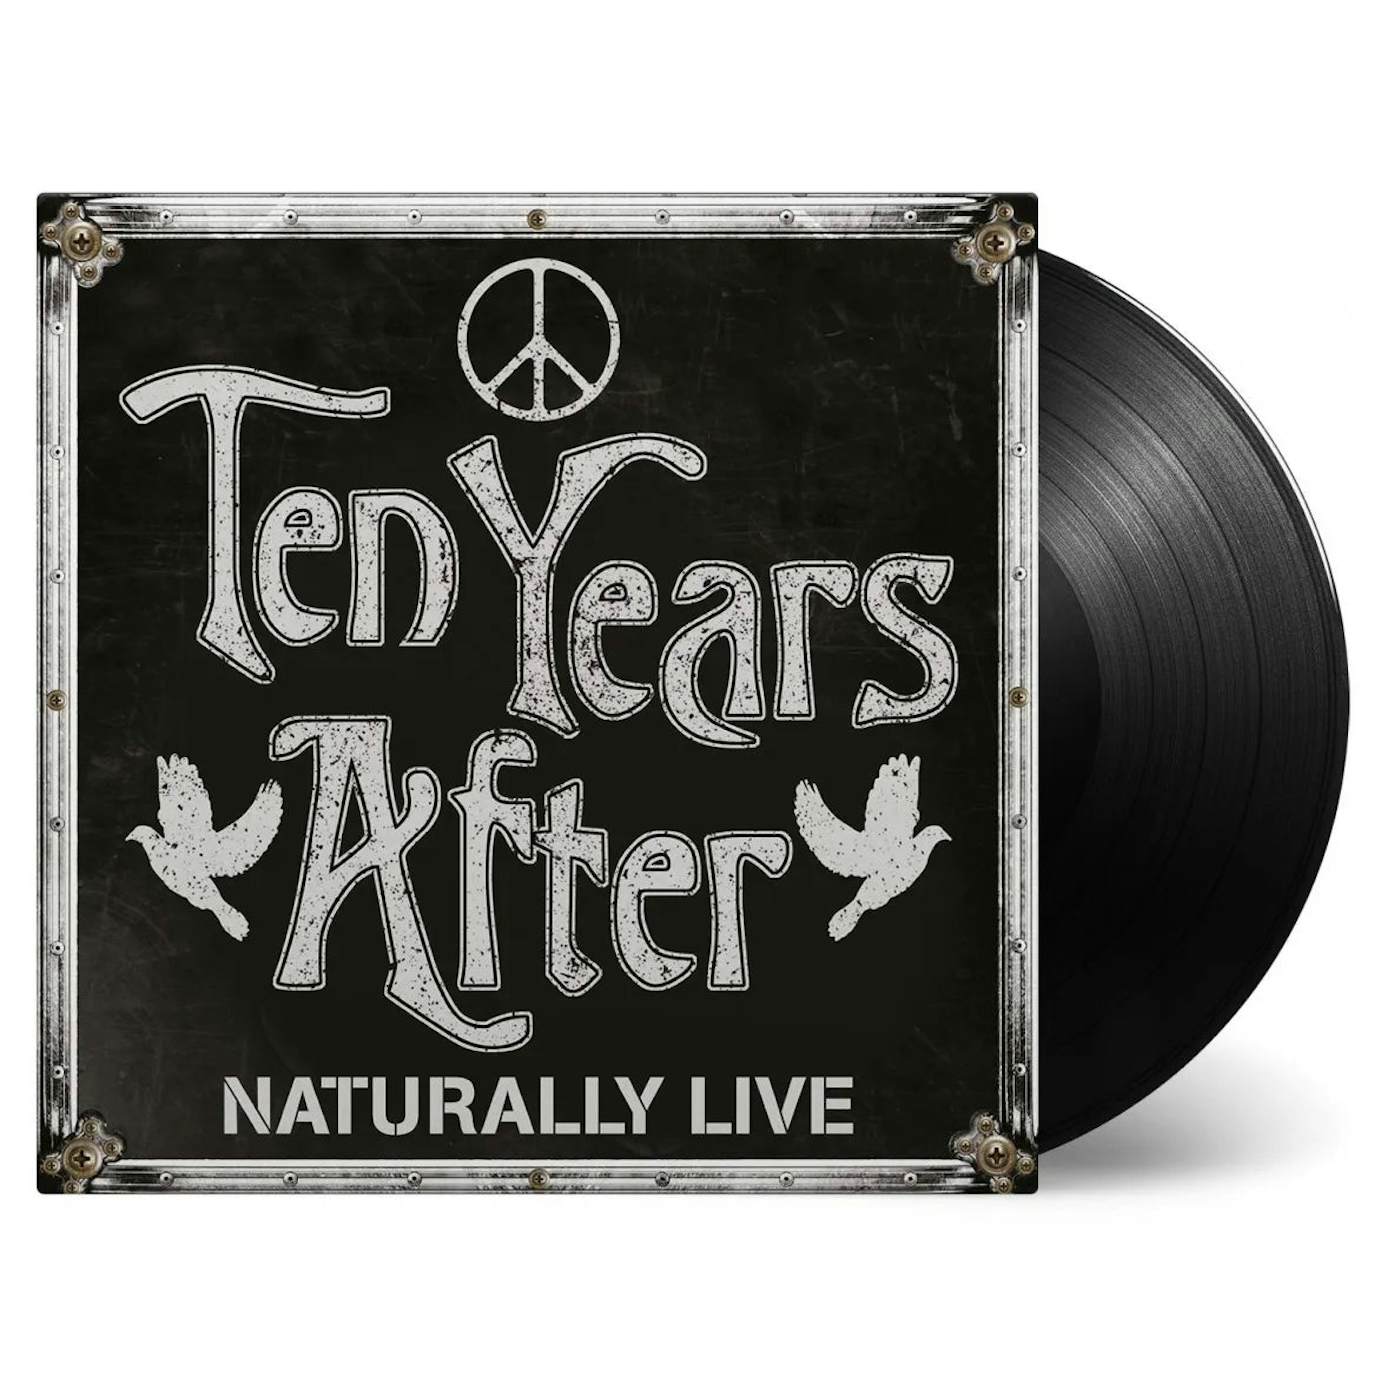 Ten Years After - Natural Live